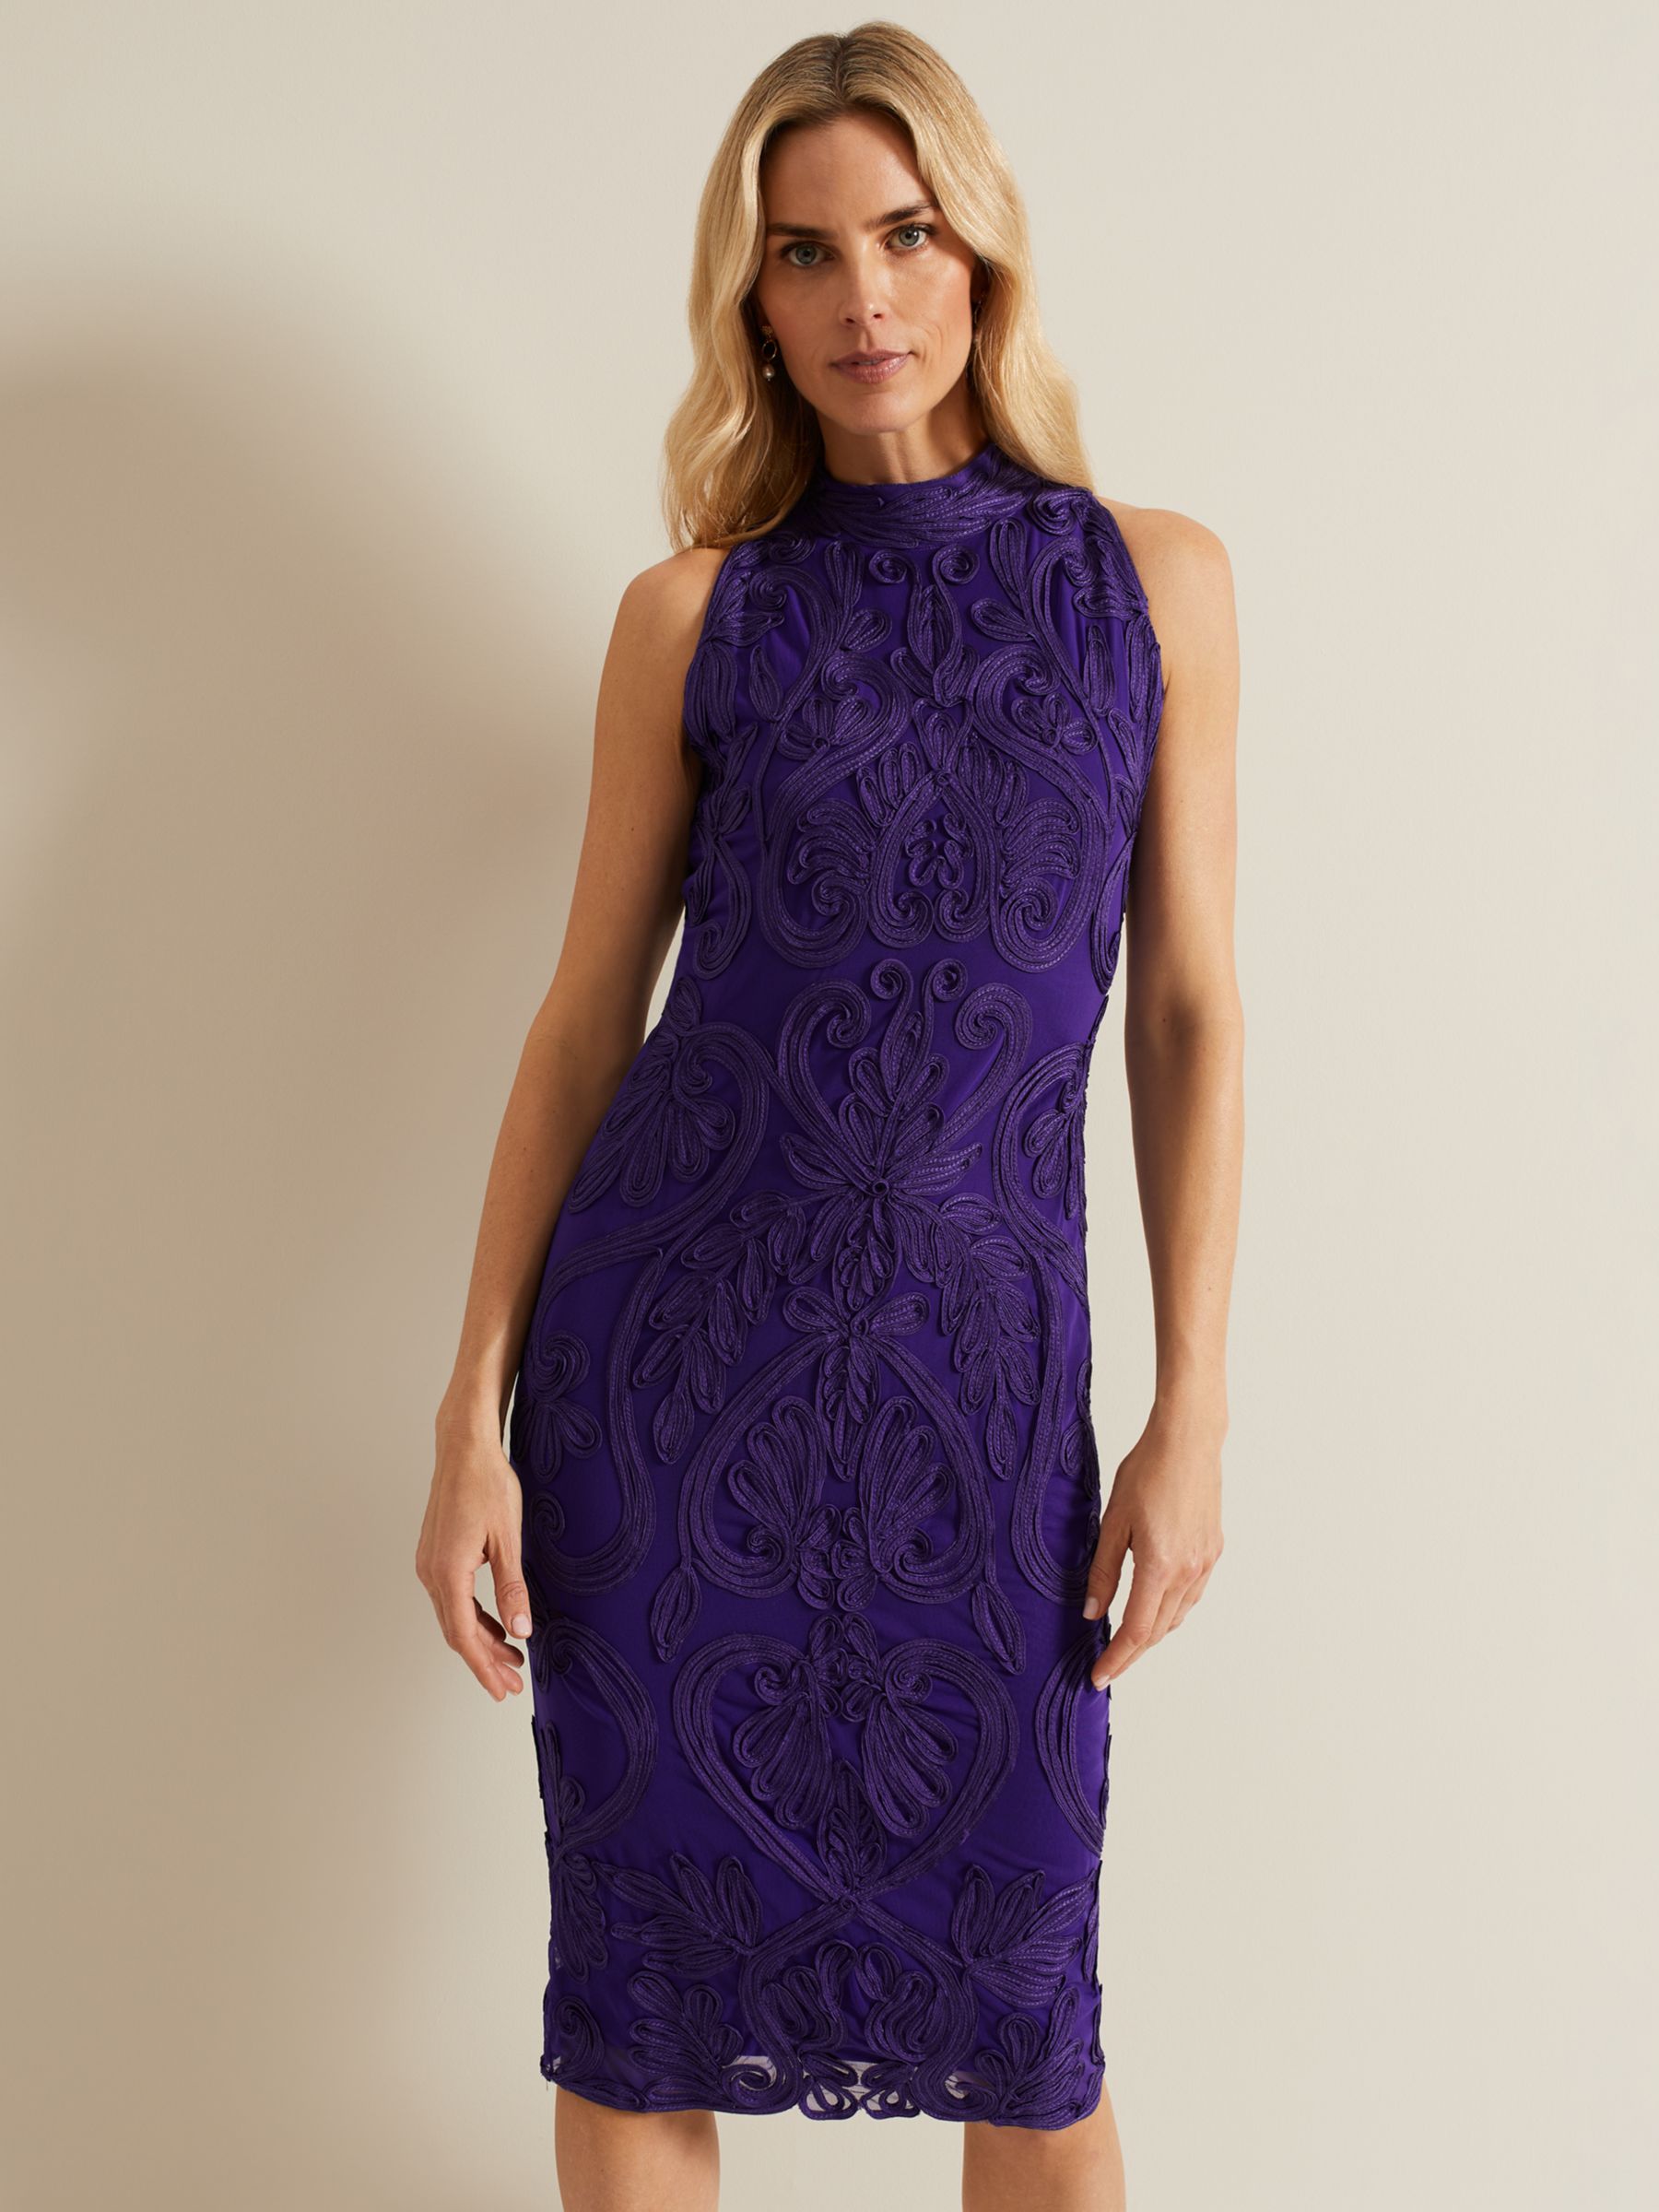 Phase Eight Andrea Tapework Dress, Violet, 6